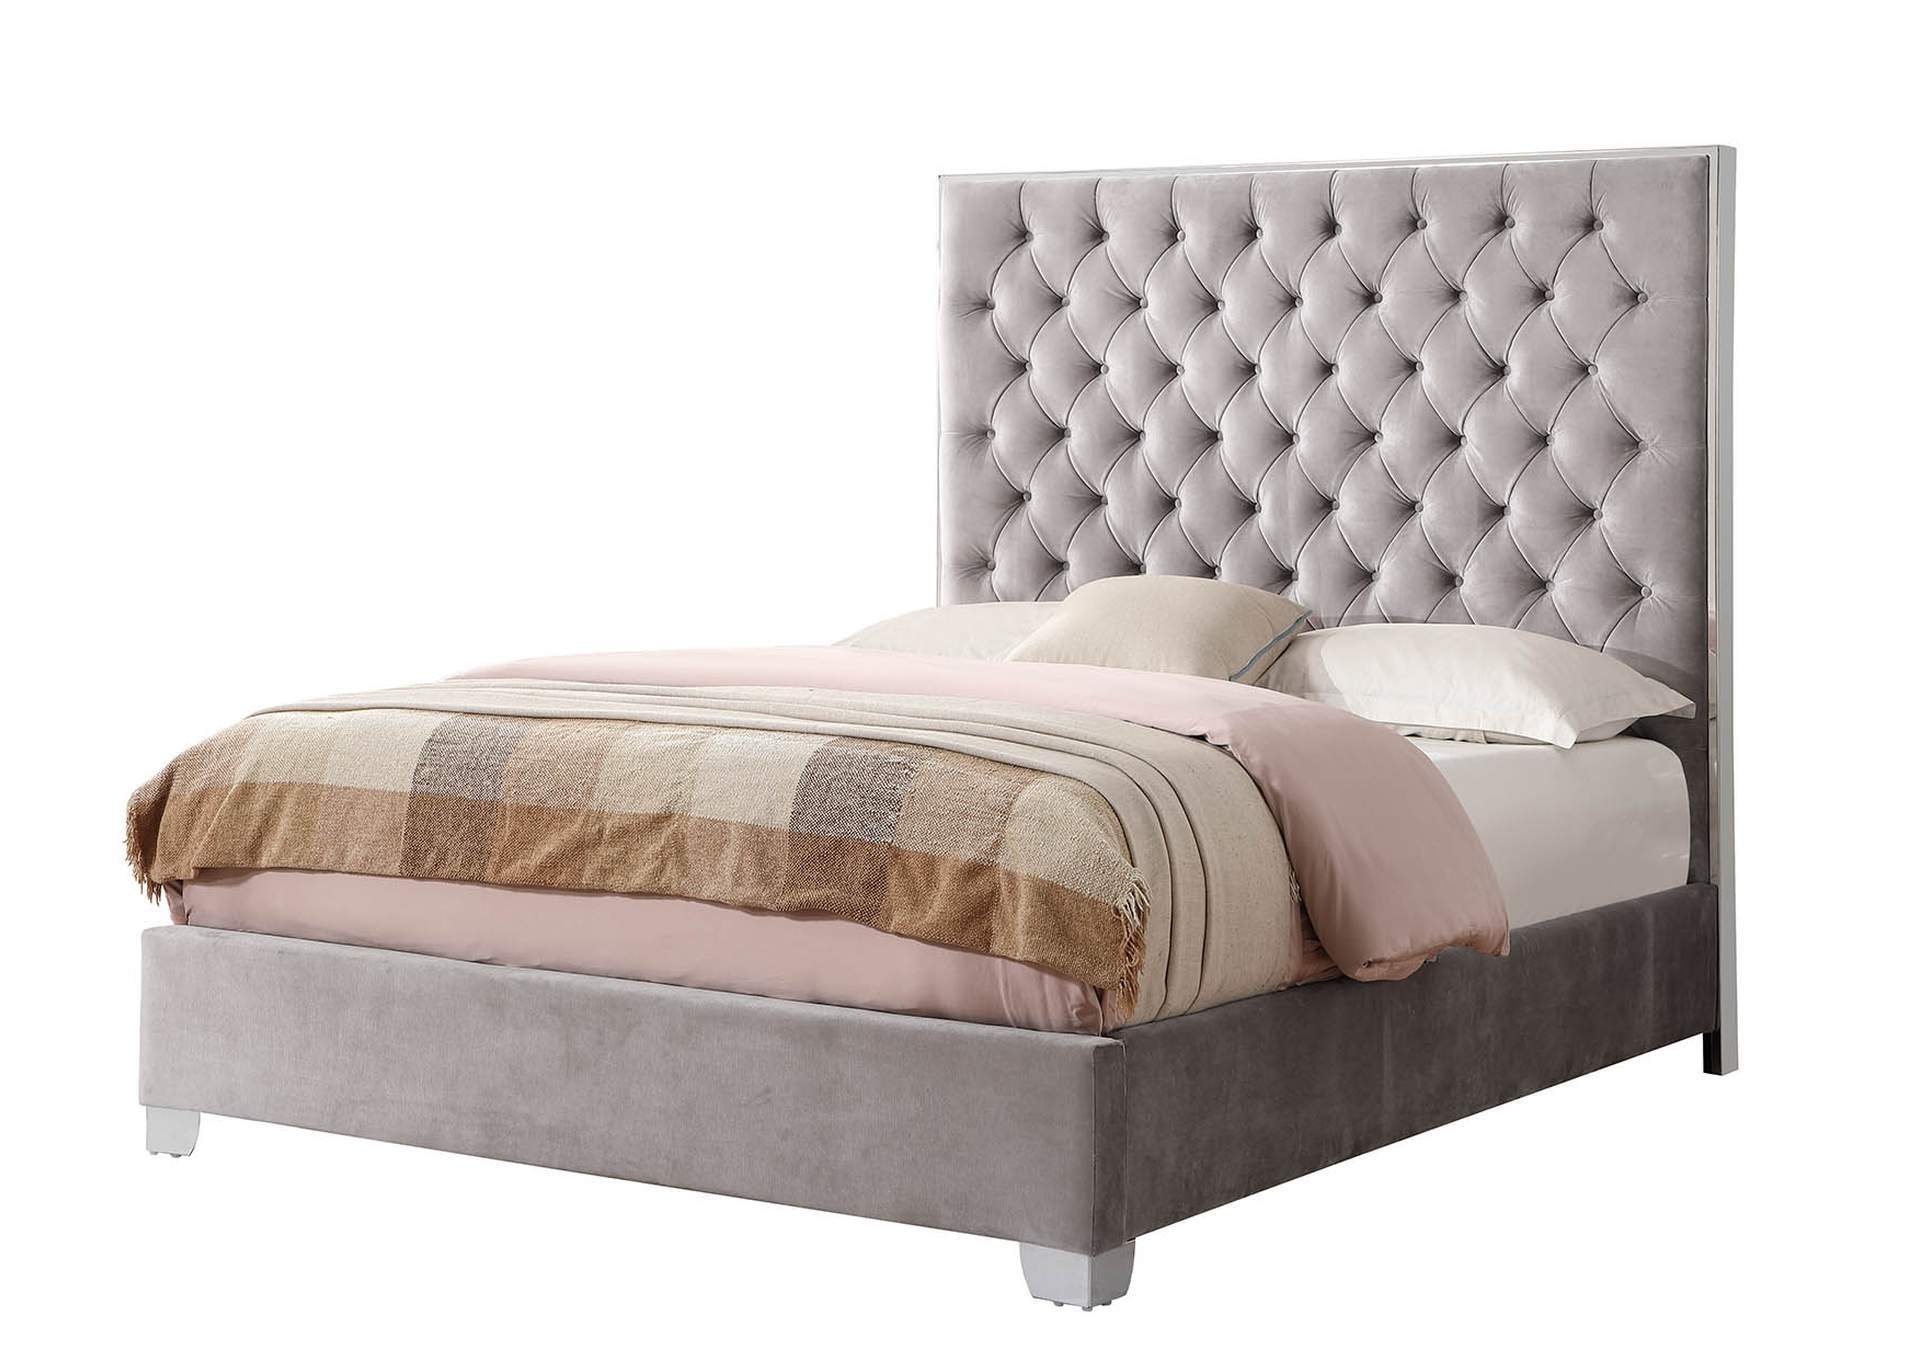 Lacey Queen Upholstered Bed,Emerald Home Furnishings